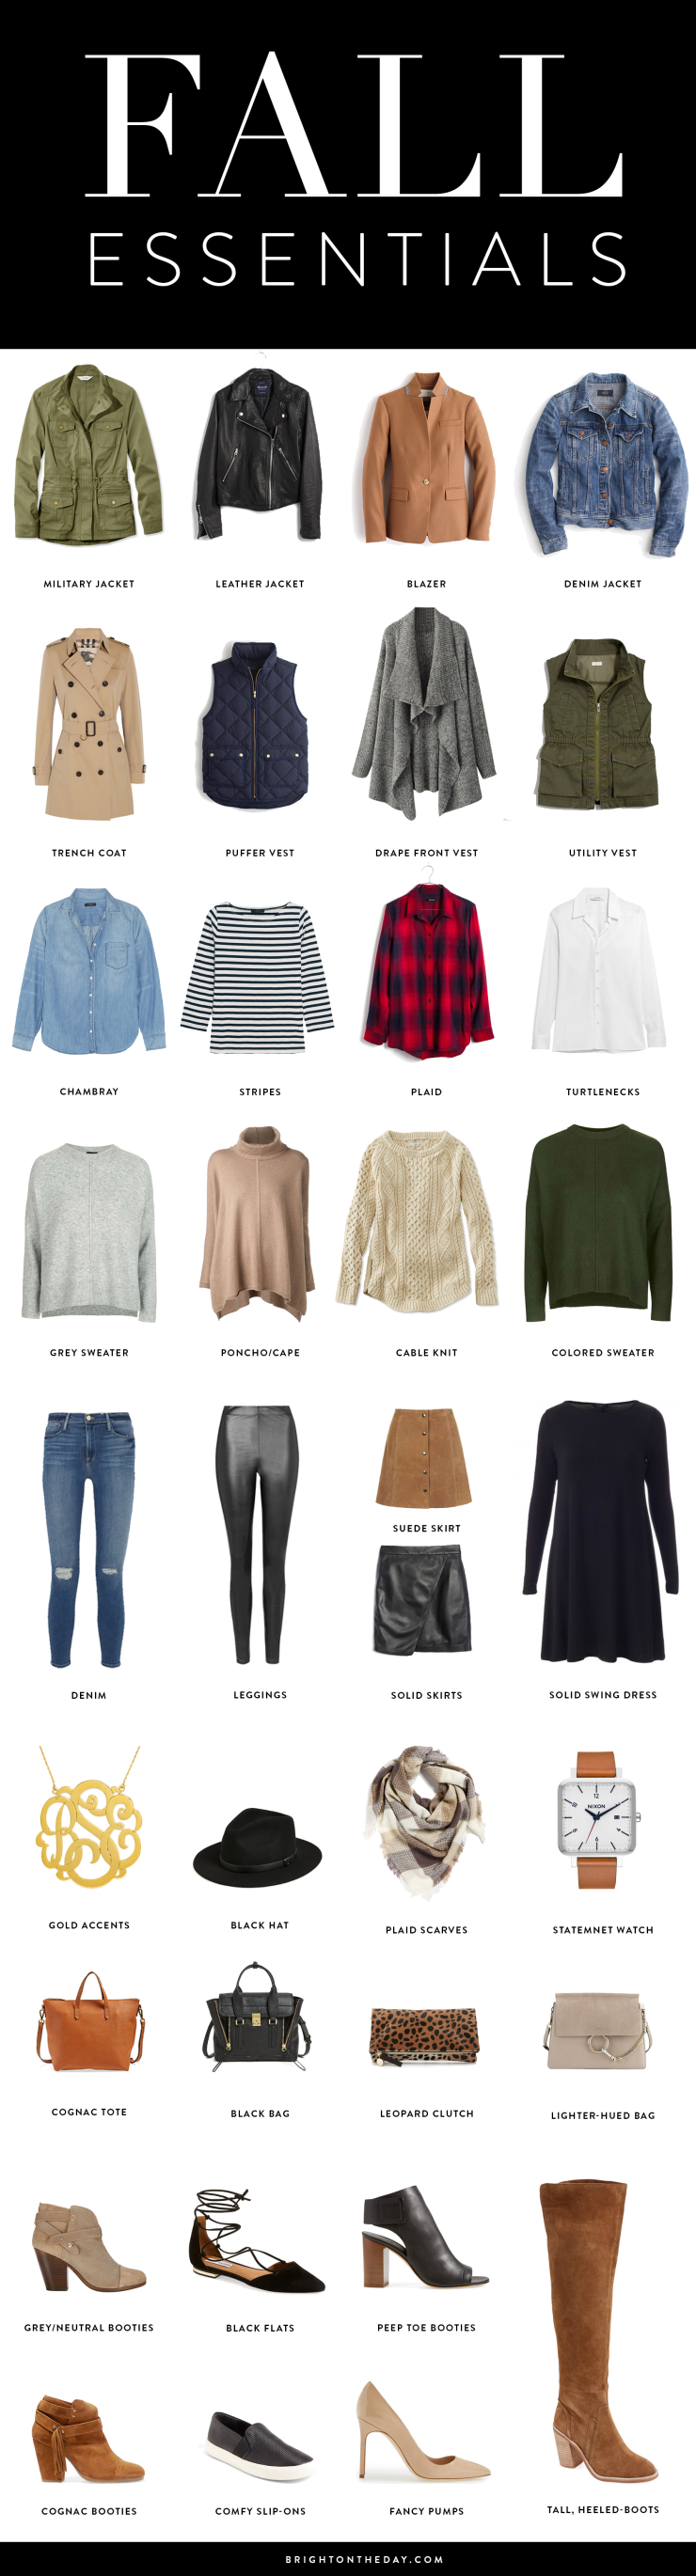 fall must haves, fall essentials, fall capsule wardrobe, fall basics for cute fall outfits